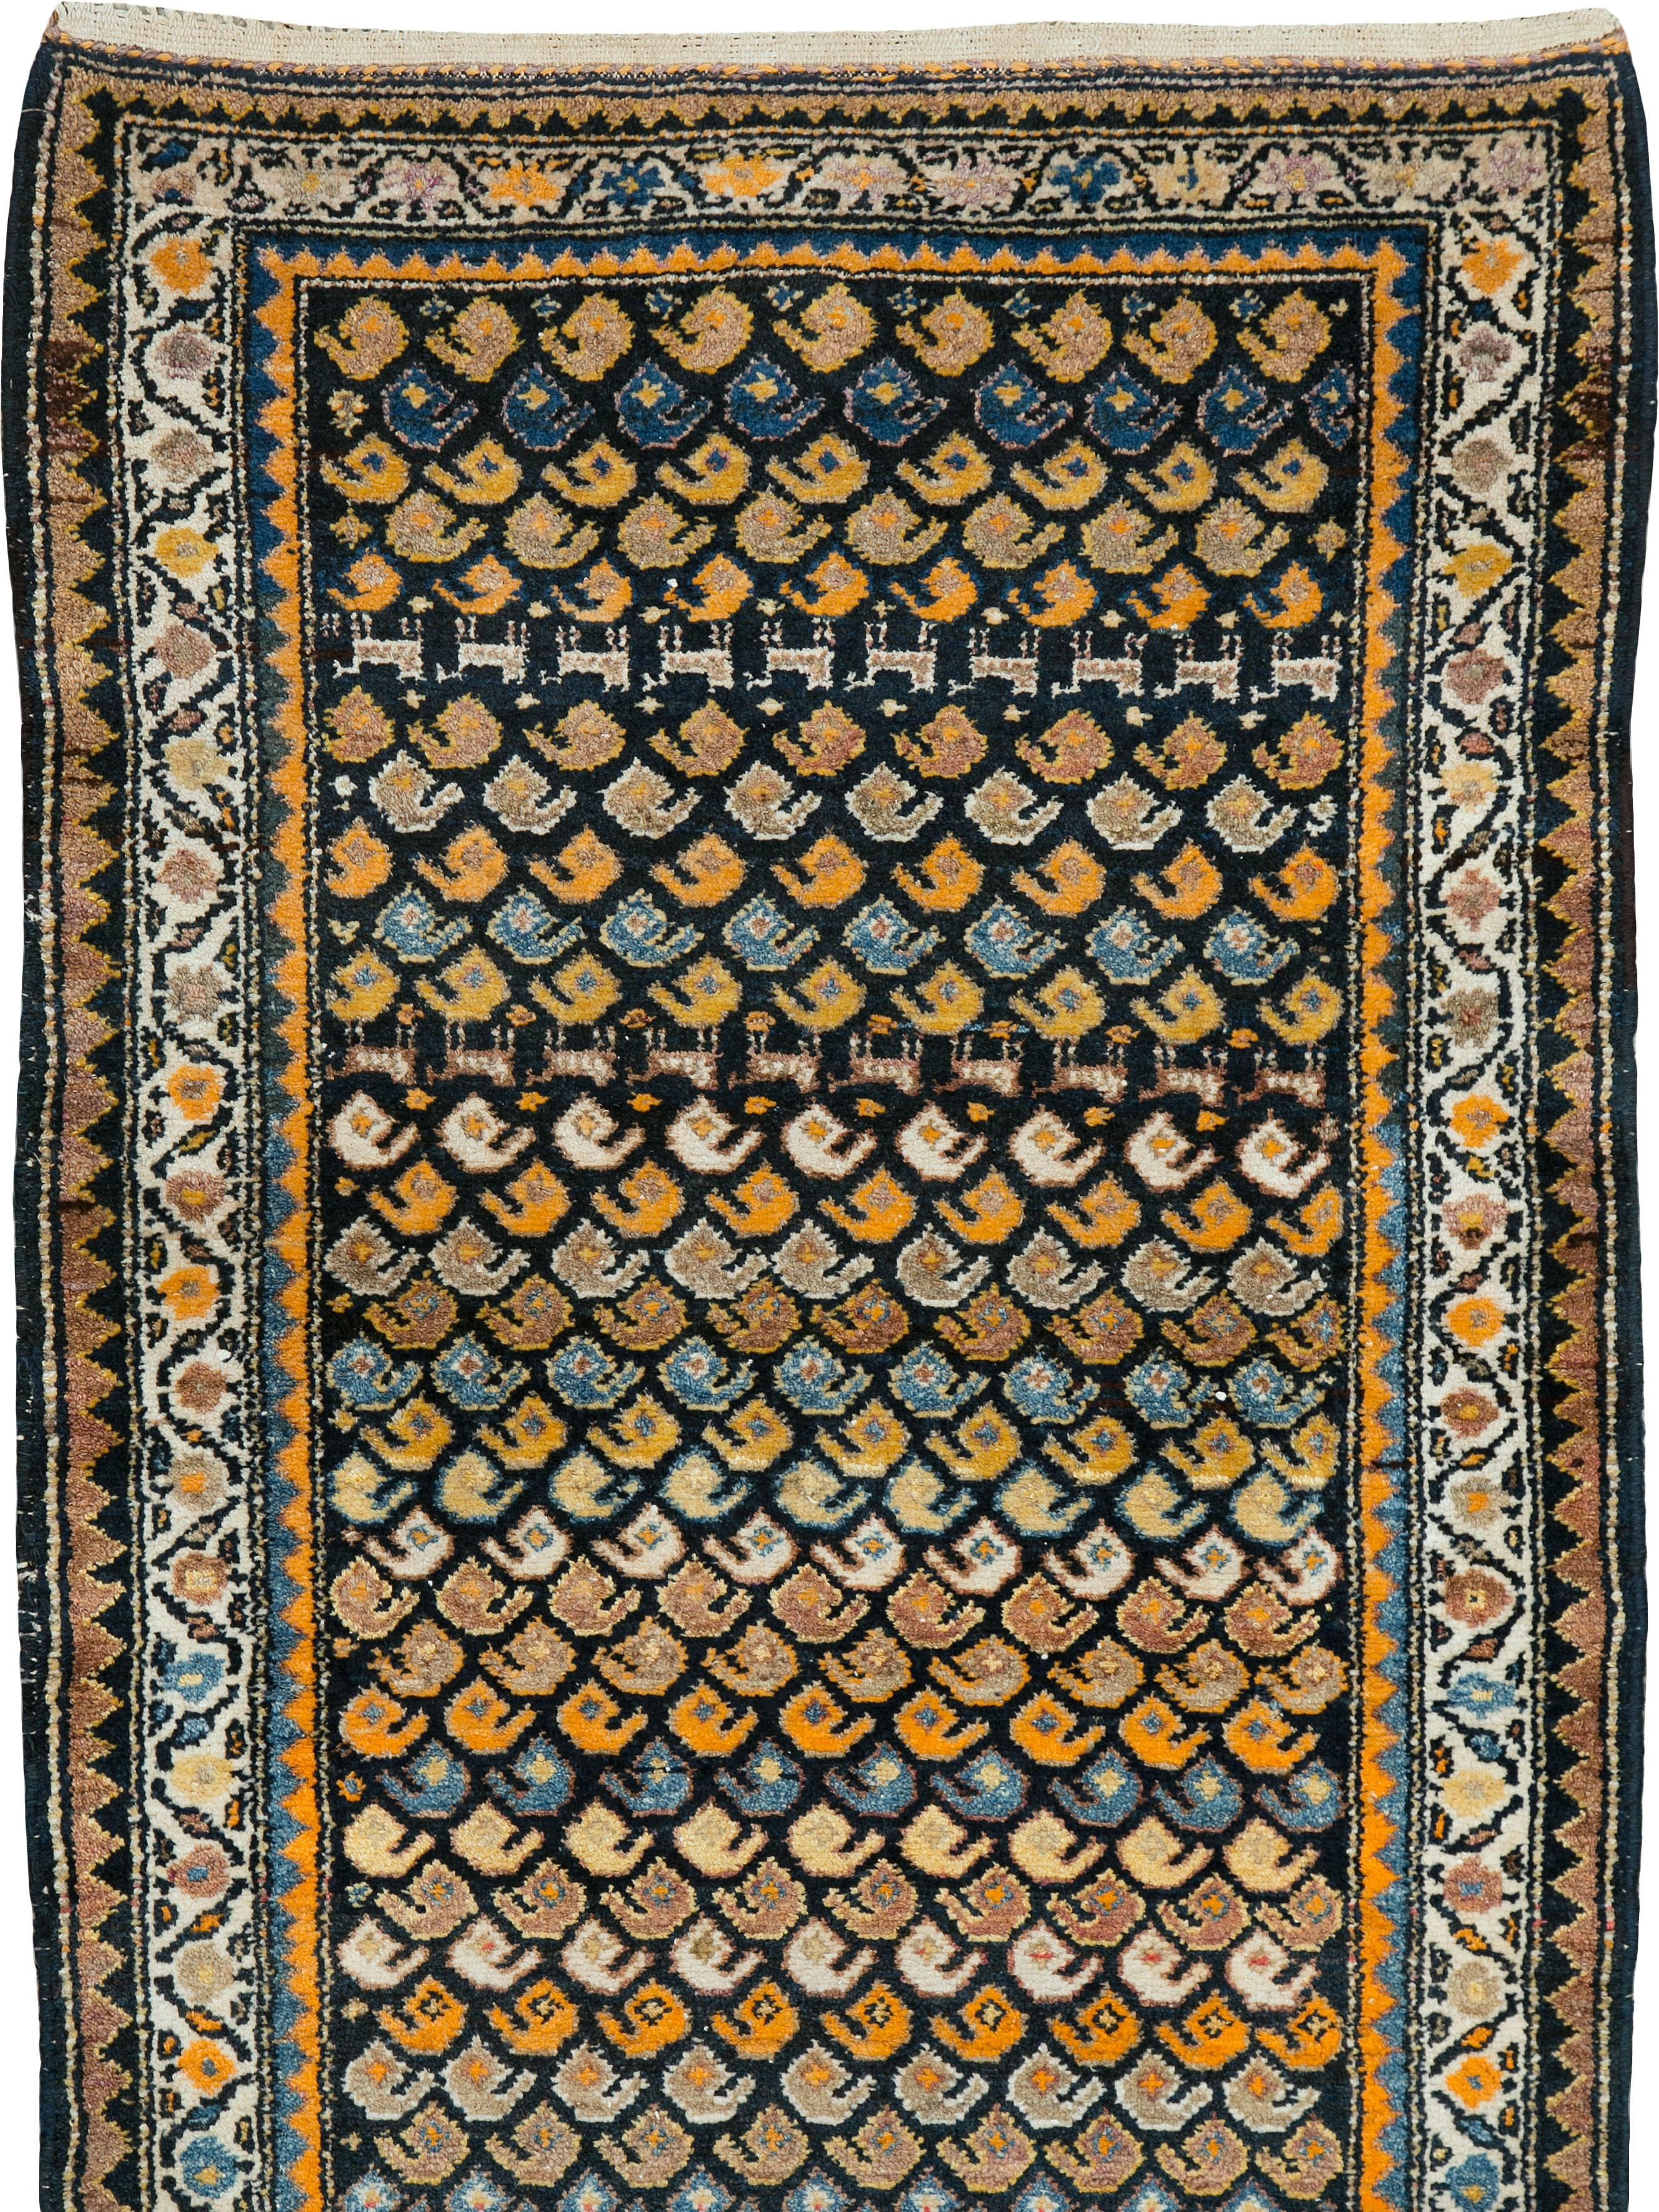 Antique Persian Malayer Pictorial Rug In Excellent Condition For Sale In New York, NY